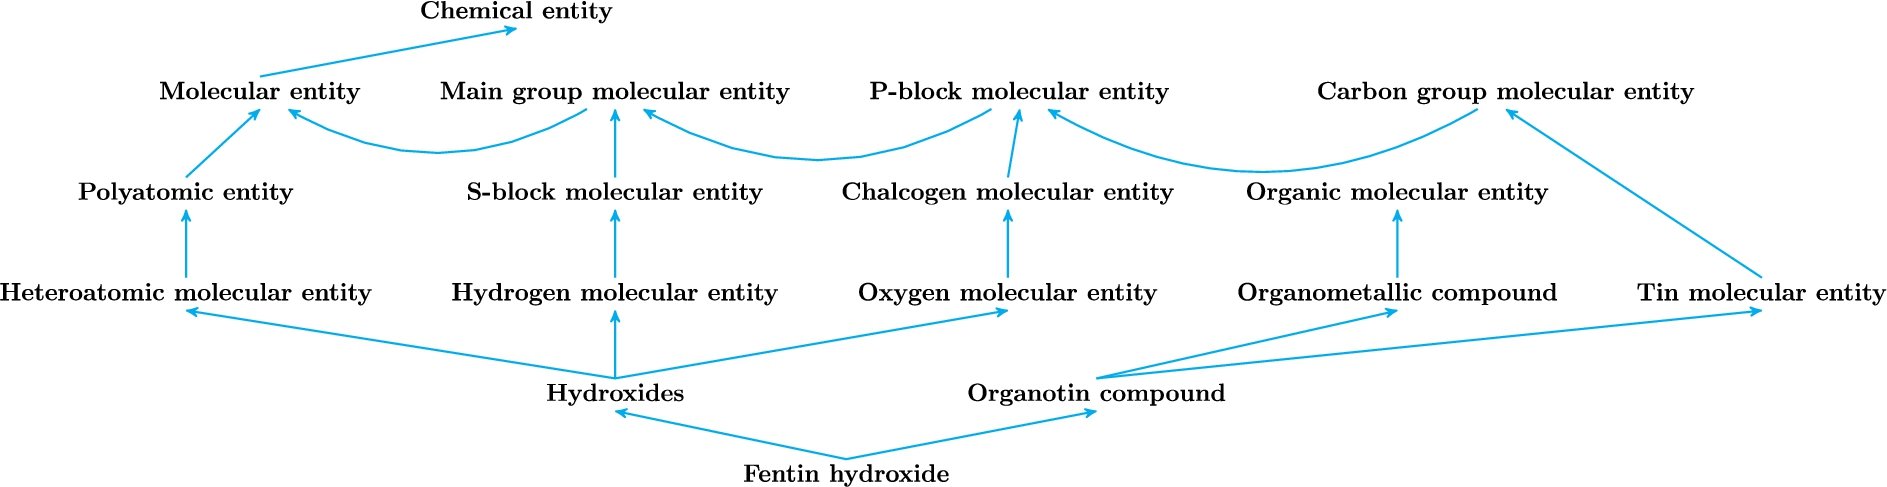 Fentin hydroxide and its hierarchical classes. Blue lines indicate the sub-class relationships.